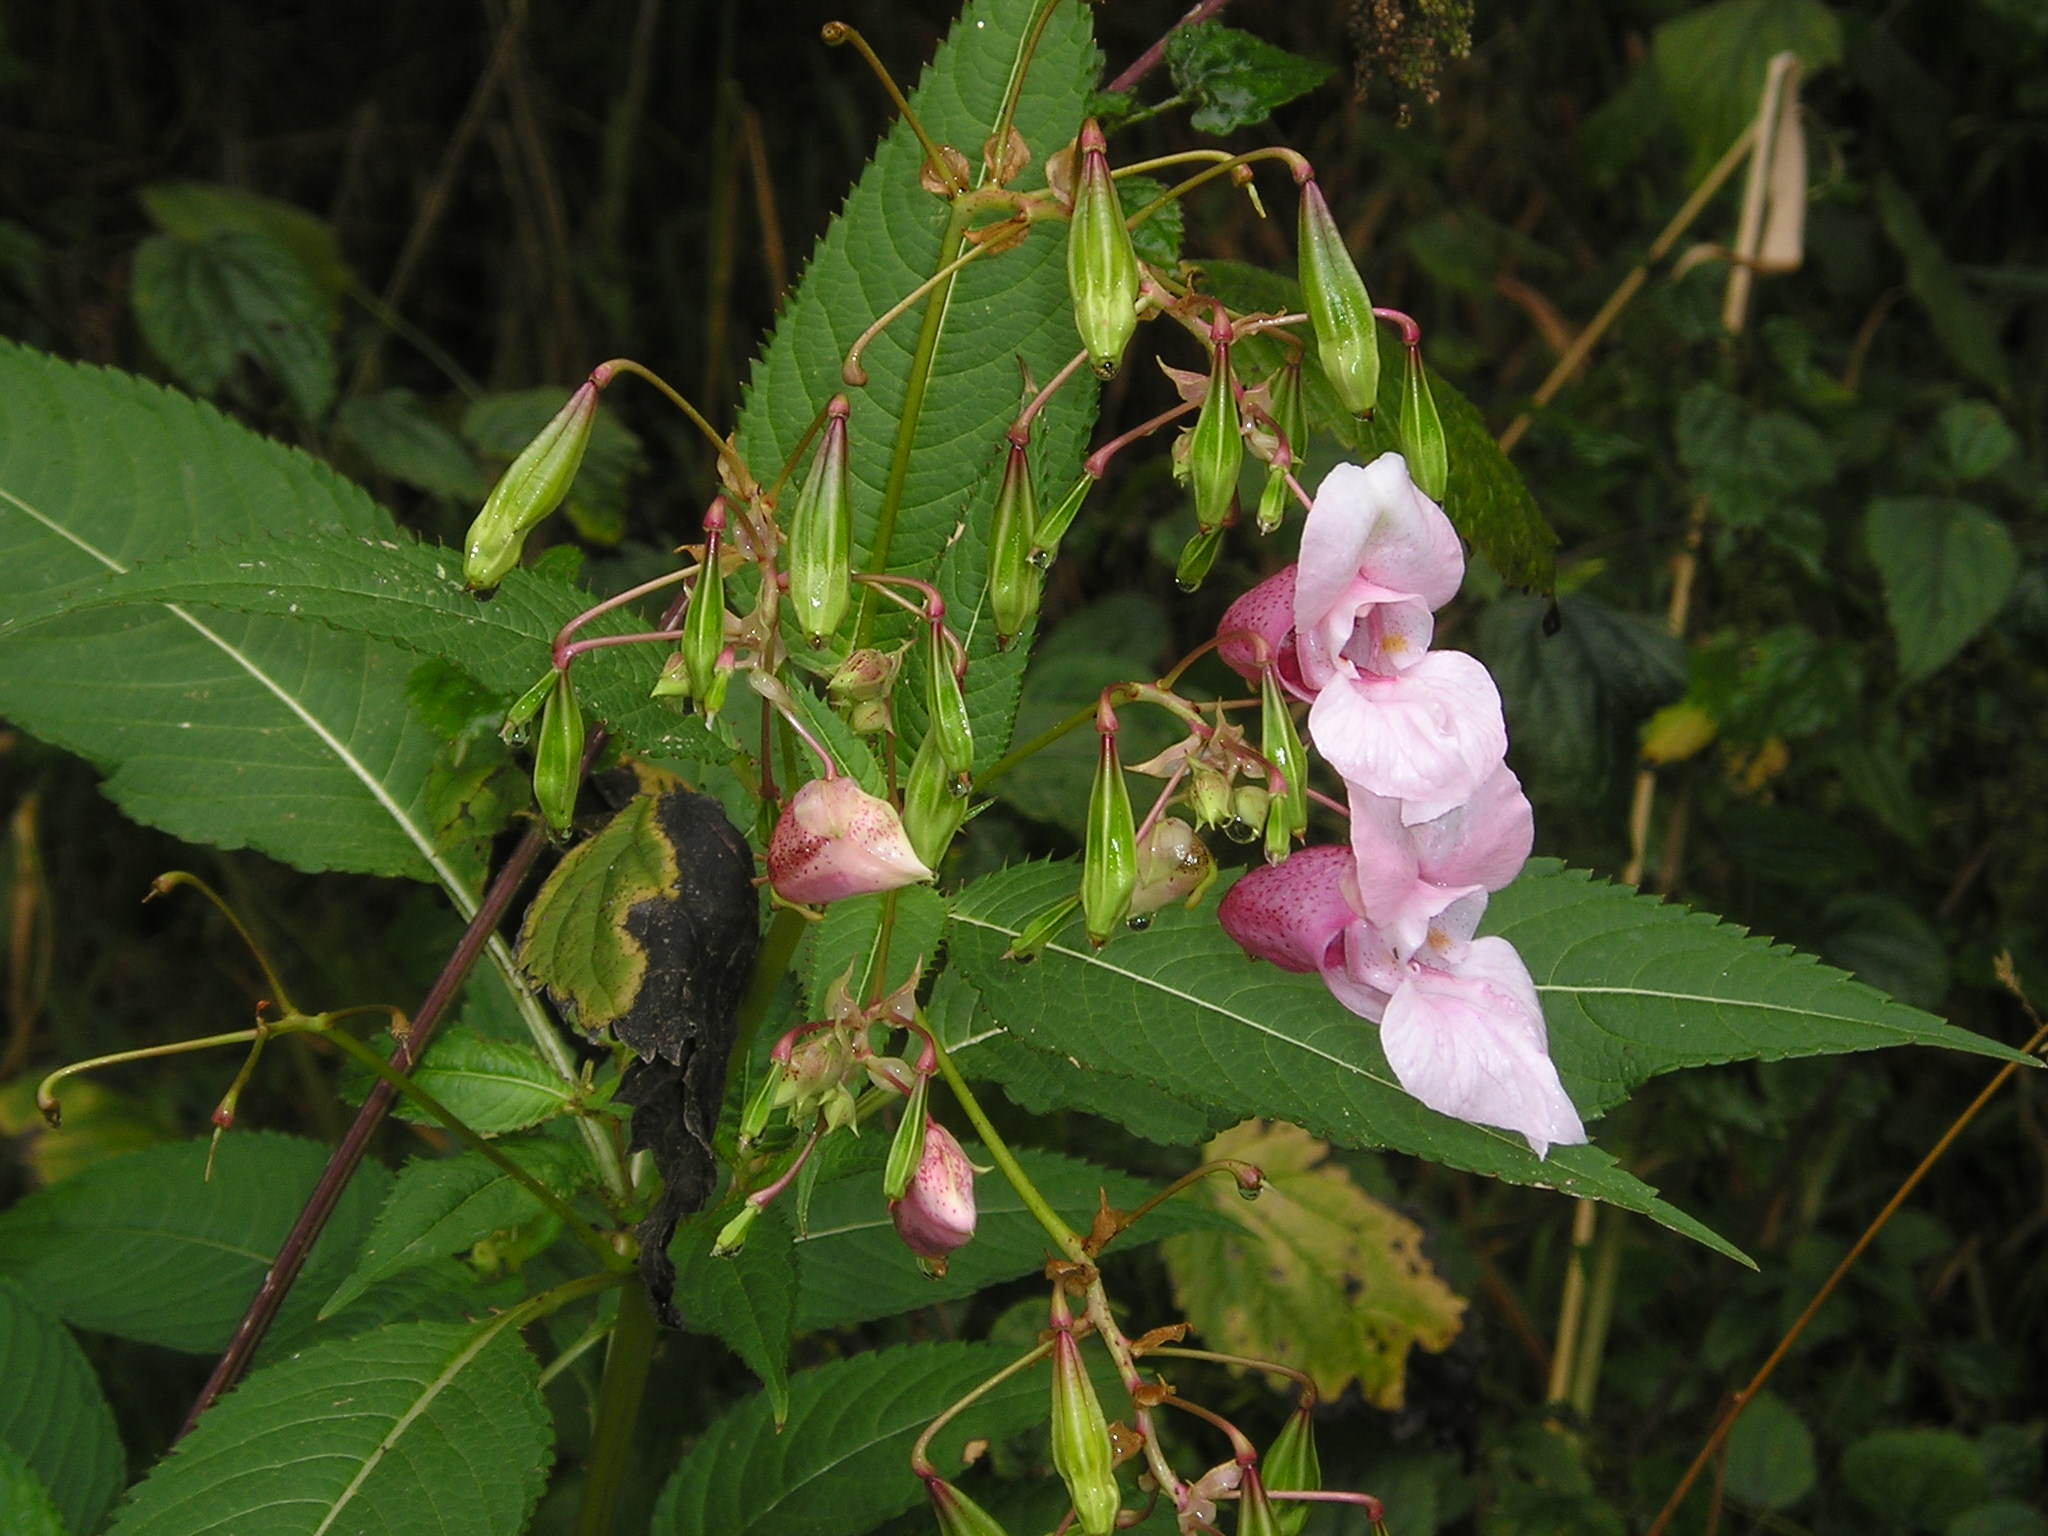 Impatiens flowers and seeds